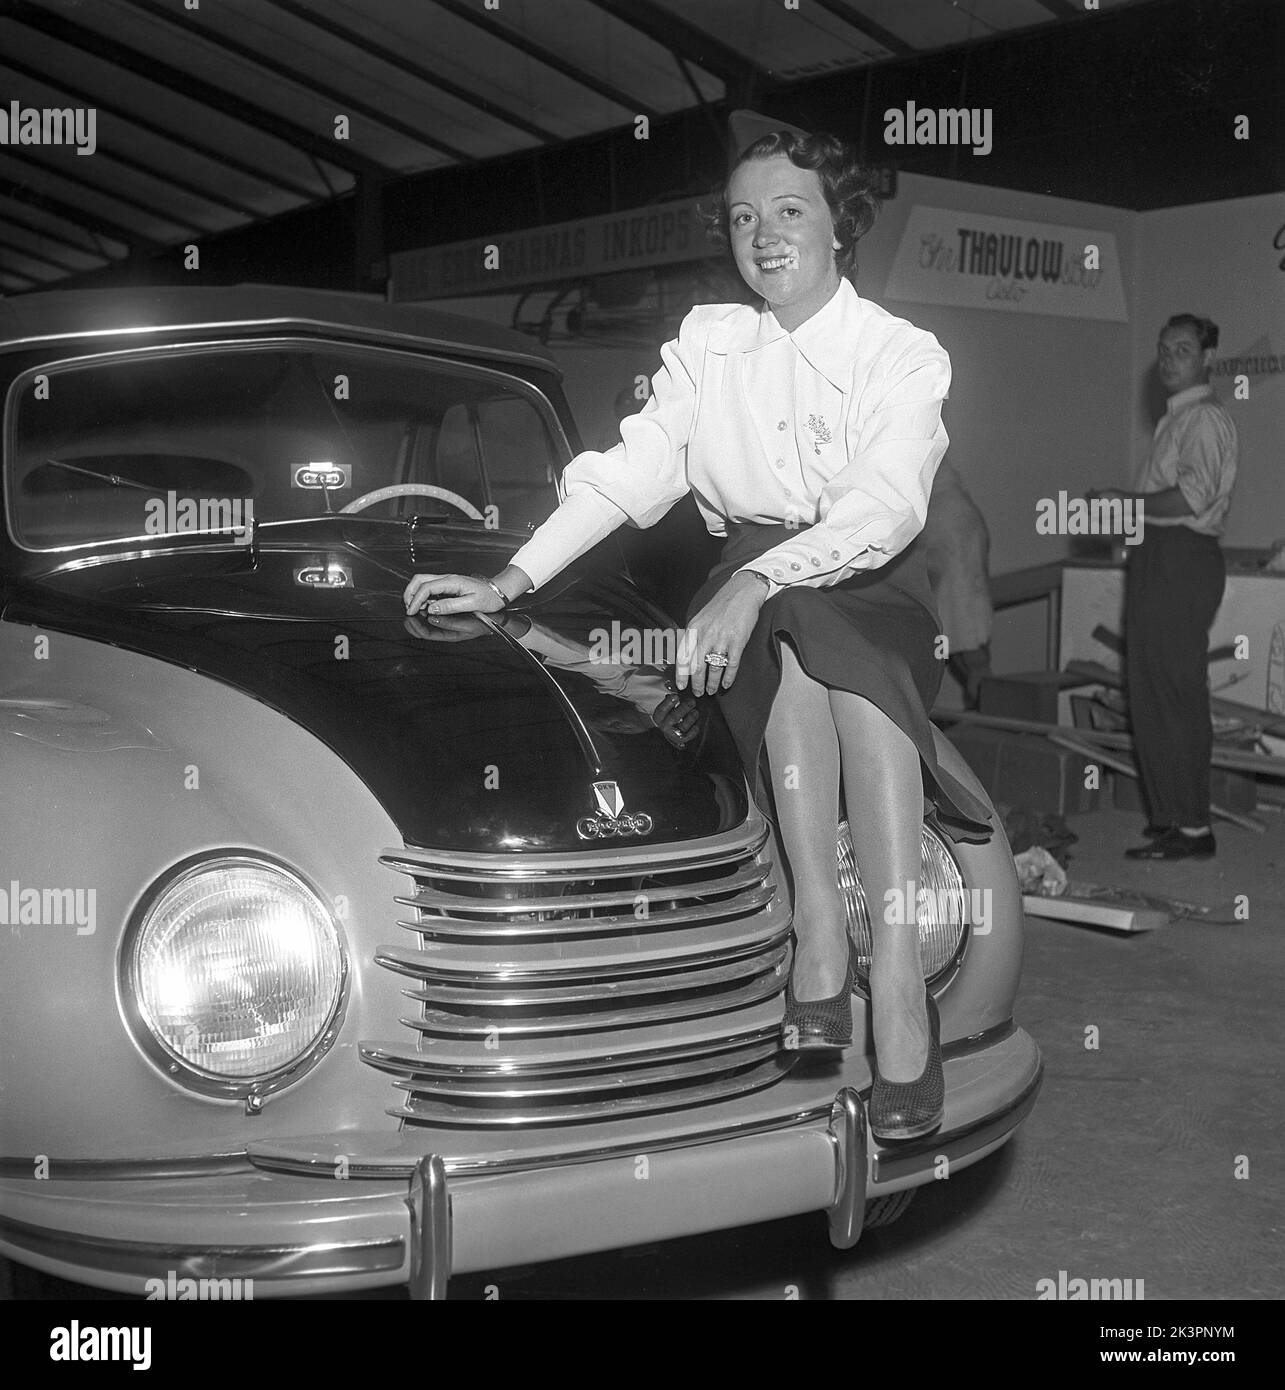 In the 1950s. A young woman on the hood of the brand new car, a DKW, presented to the swedish public at the trade fair St. Eriksmassan. German car manufacturer that also produces motorcycles, part of the Auto Union. Sweden 1950 Kristoffersson ref AZ80-10 Stock Photo